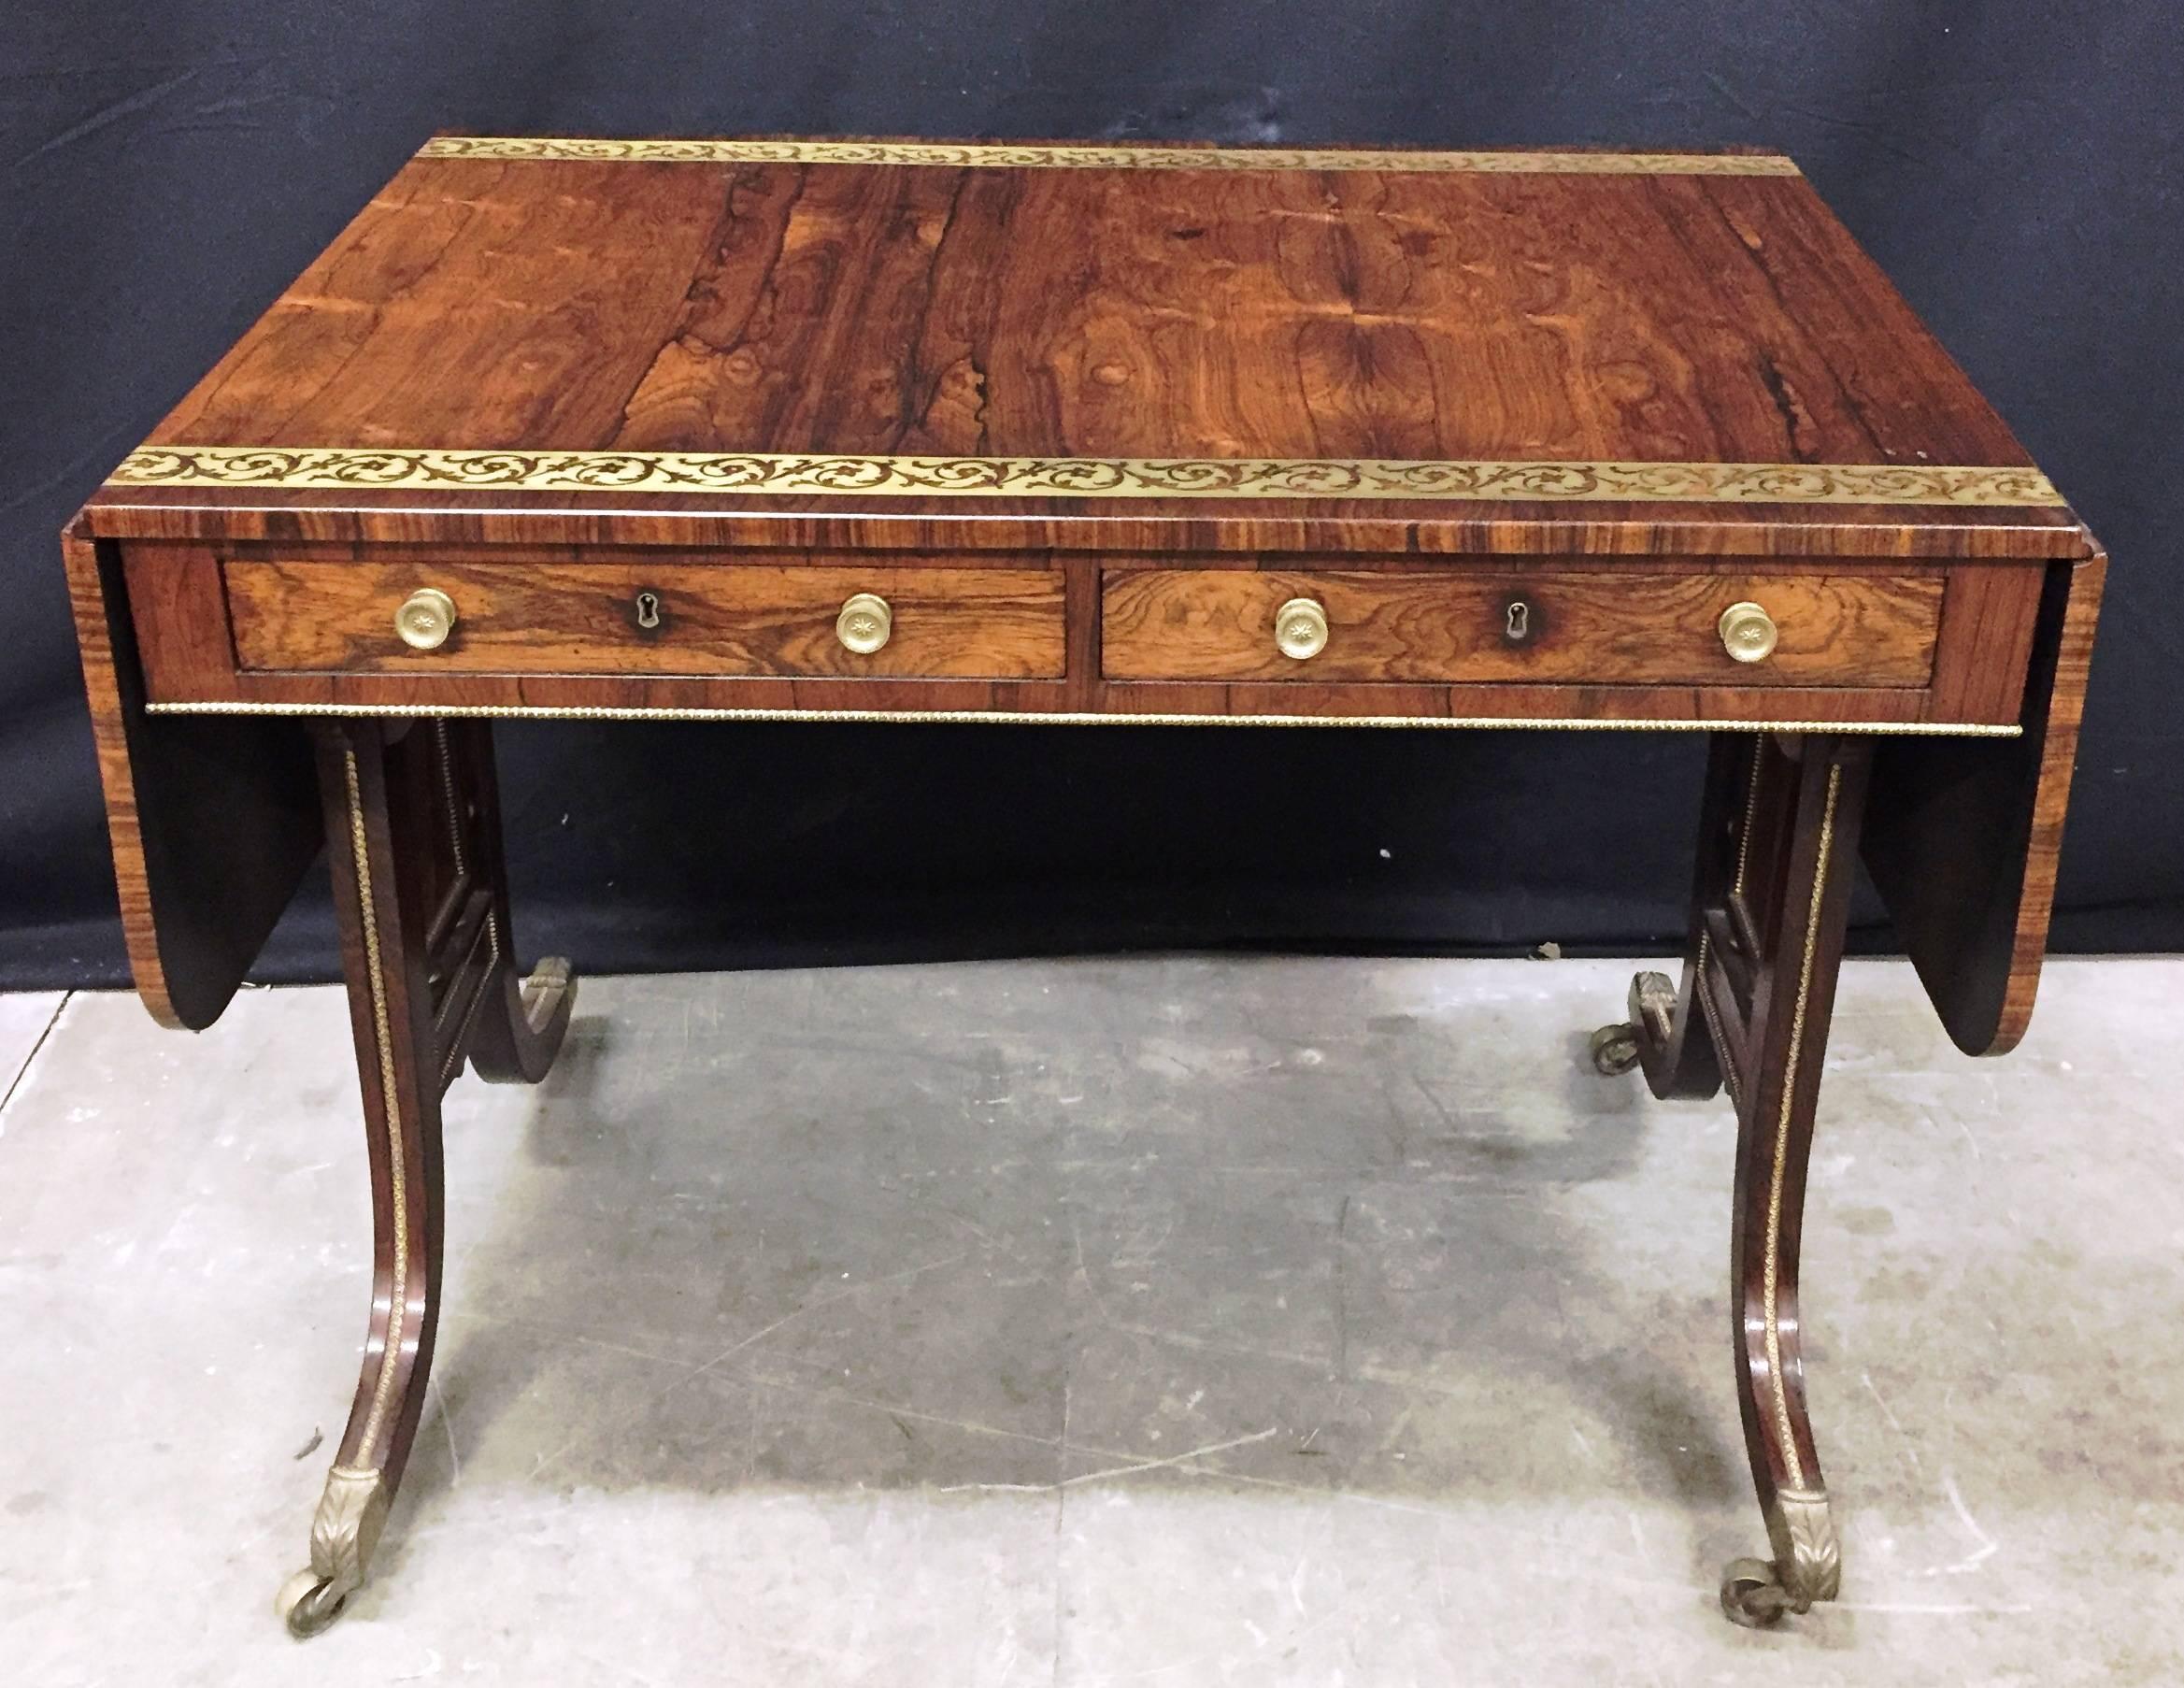 A good quality Regency period Rosewood veneered, brass inlaid sofa table, having two frieze drawers, out swept end supports each with brass mounts and the original brass castors.